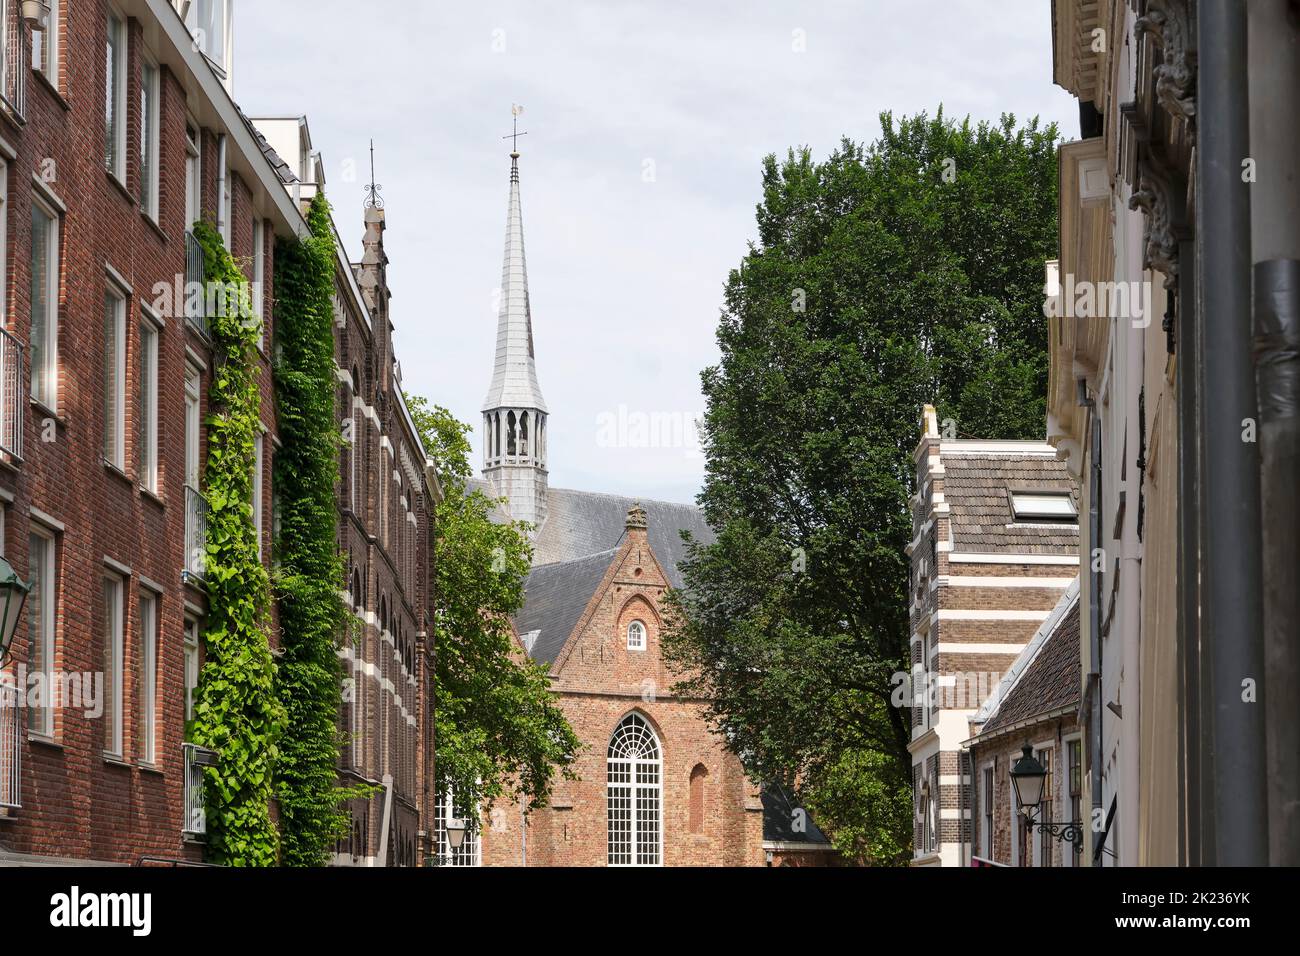 View on the Grote kerk or Jacobijnerkerk in Leeuwarden build in the 13th century. The church contains a burial vault of the Frisian Nassau's. Stock Photo